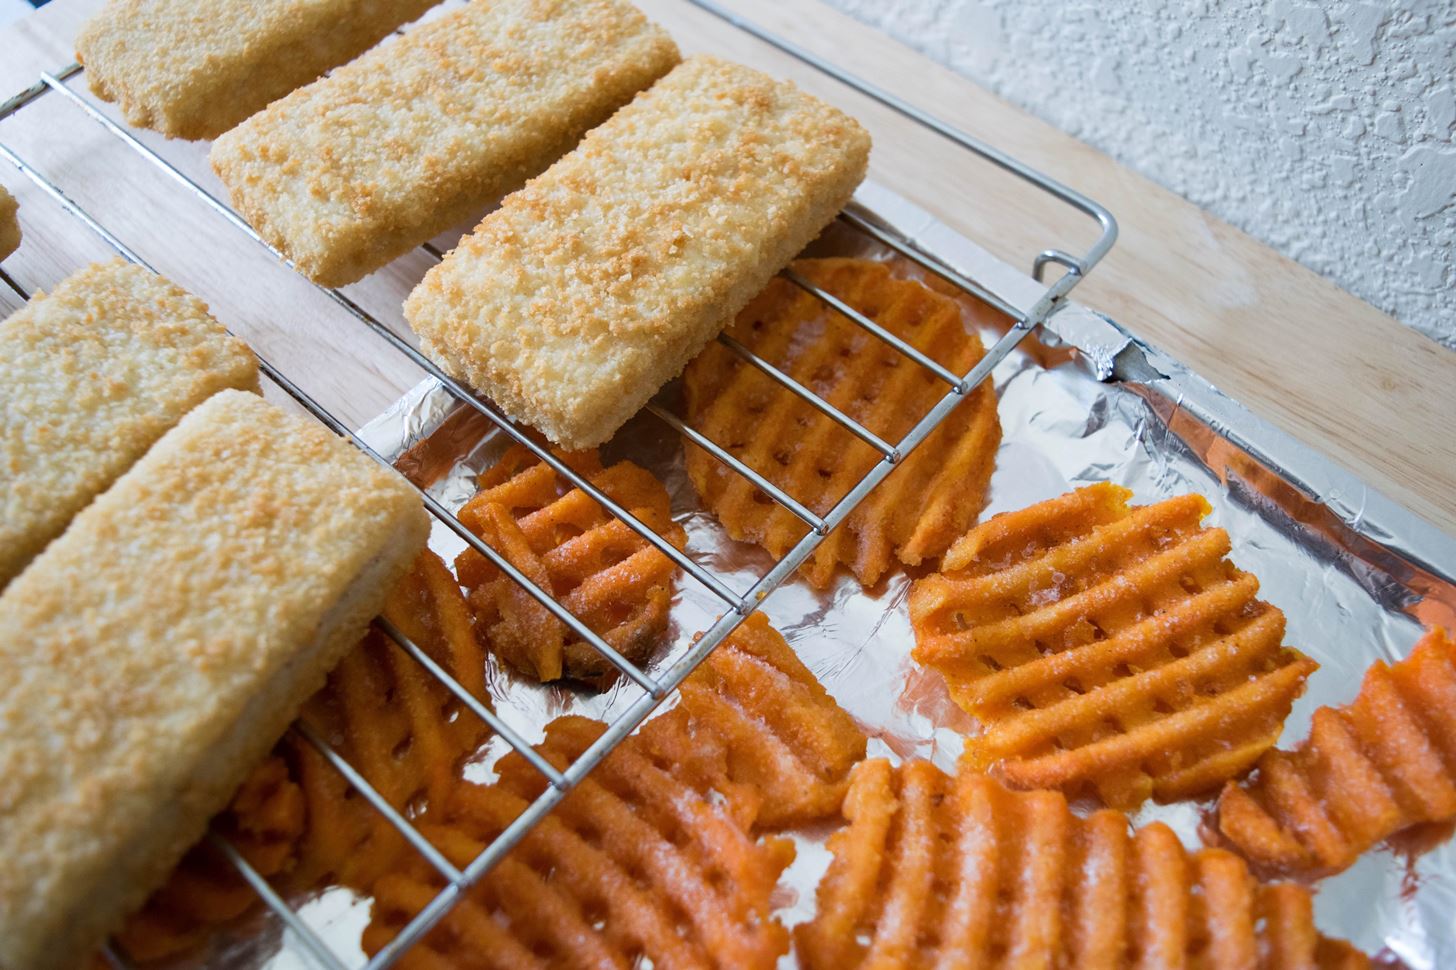 Double Your Snackage with This Brilliantly Lazy Toaster Oven Hack